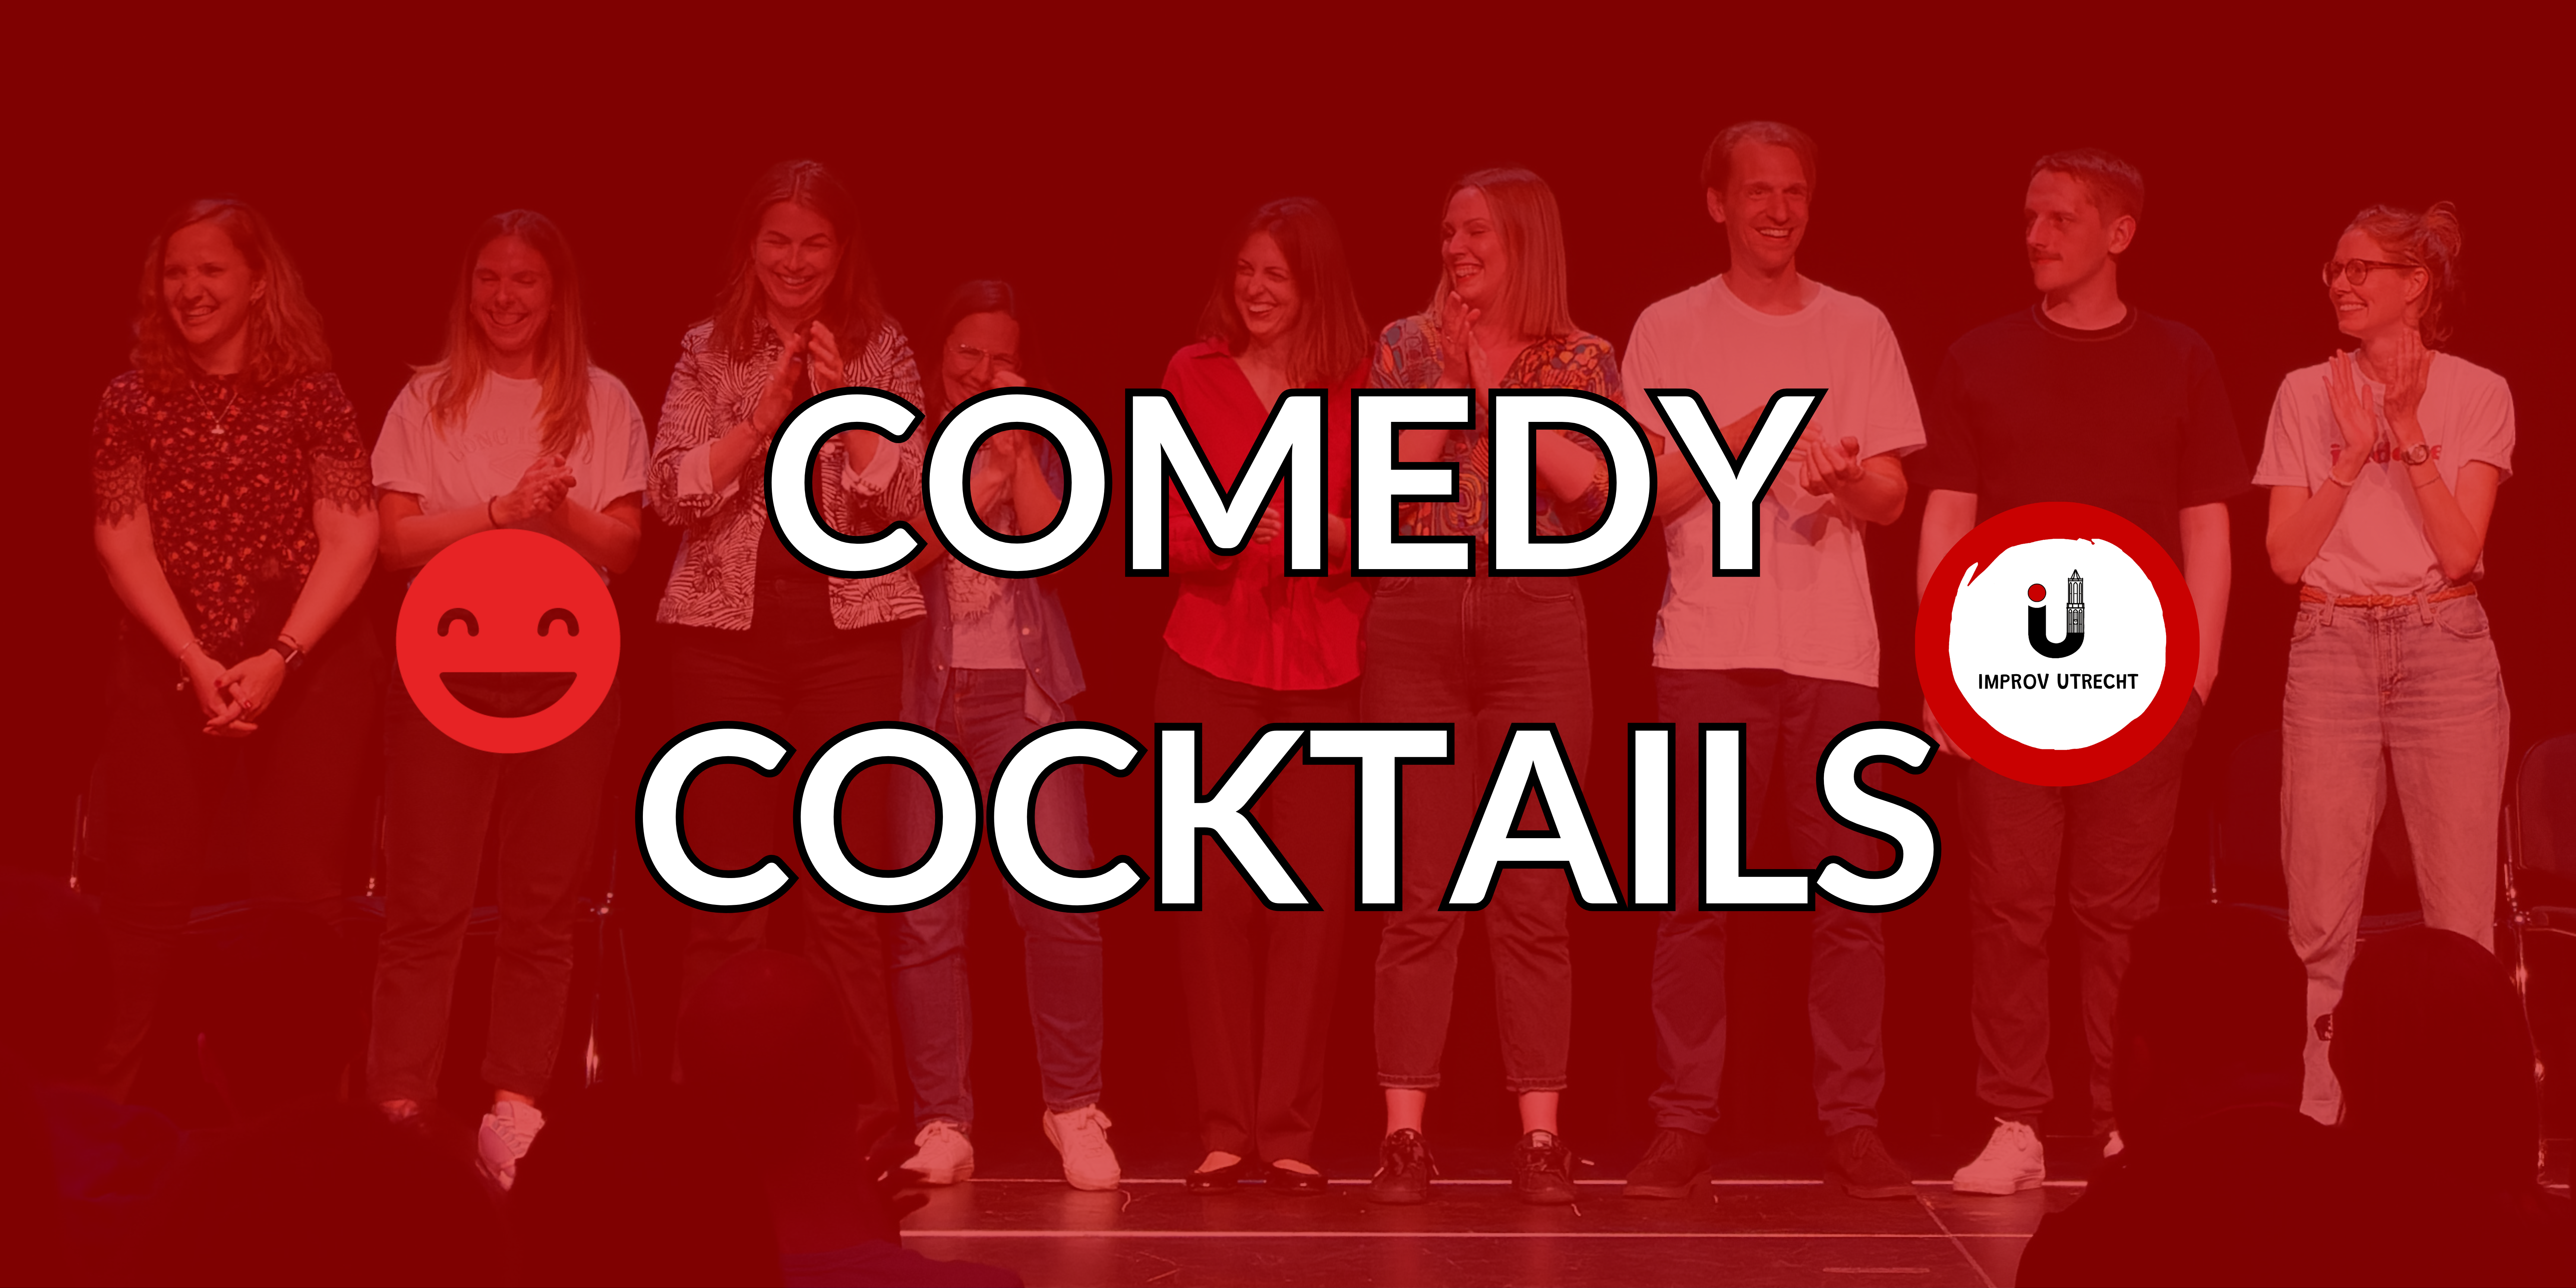 Comedy Cocktails from easylaughs & Improv Utrecht